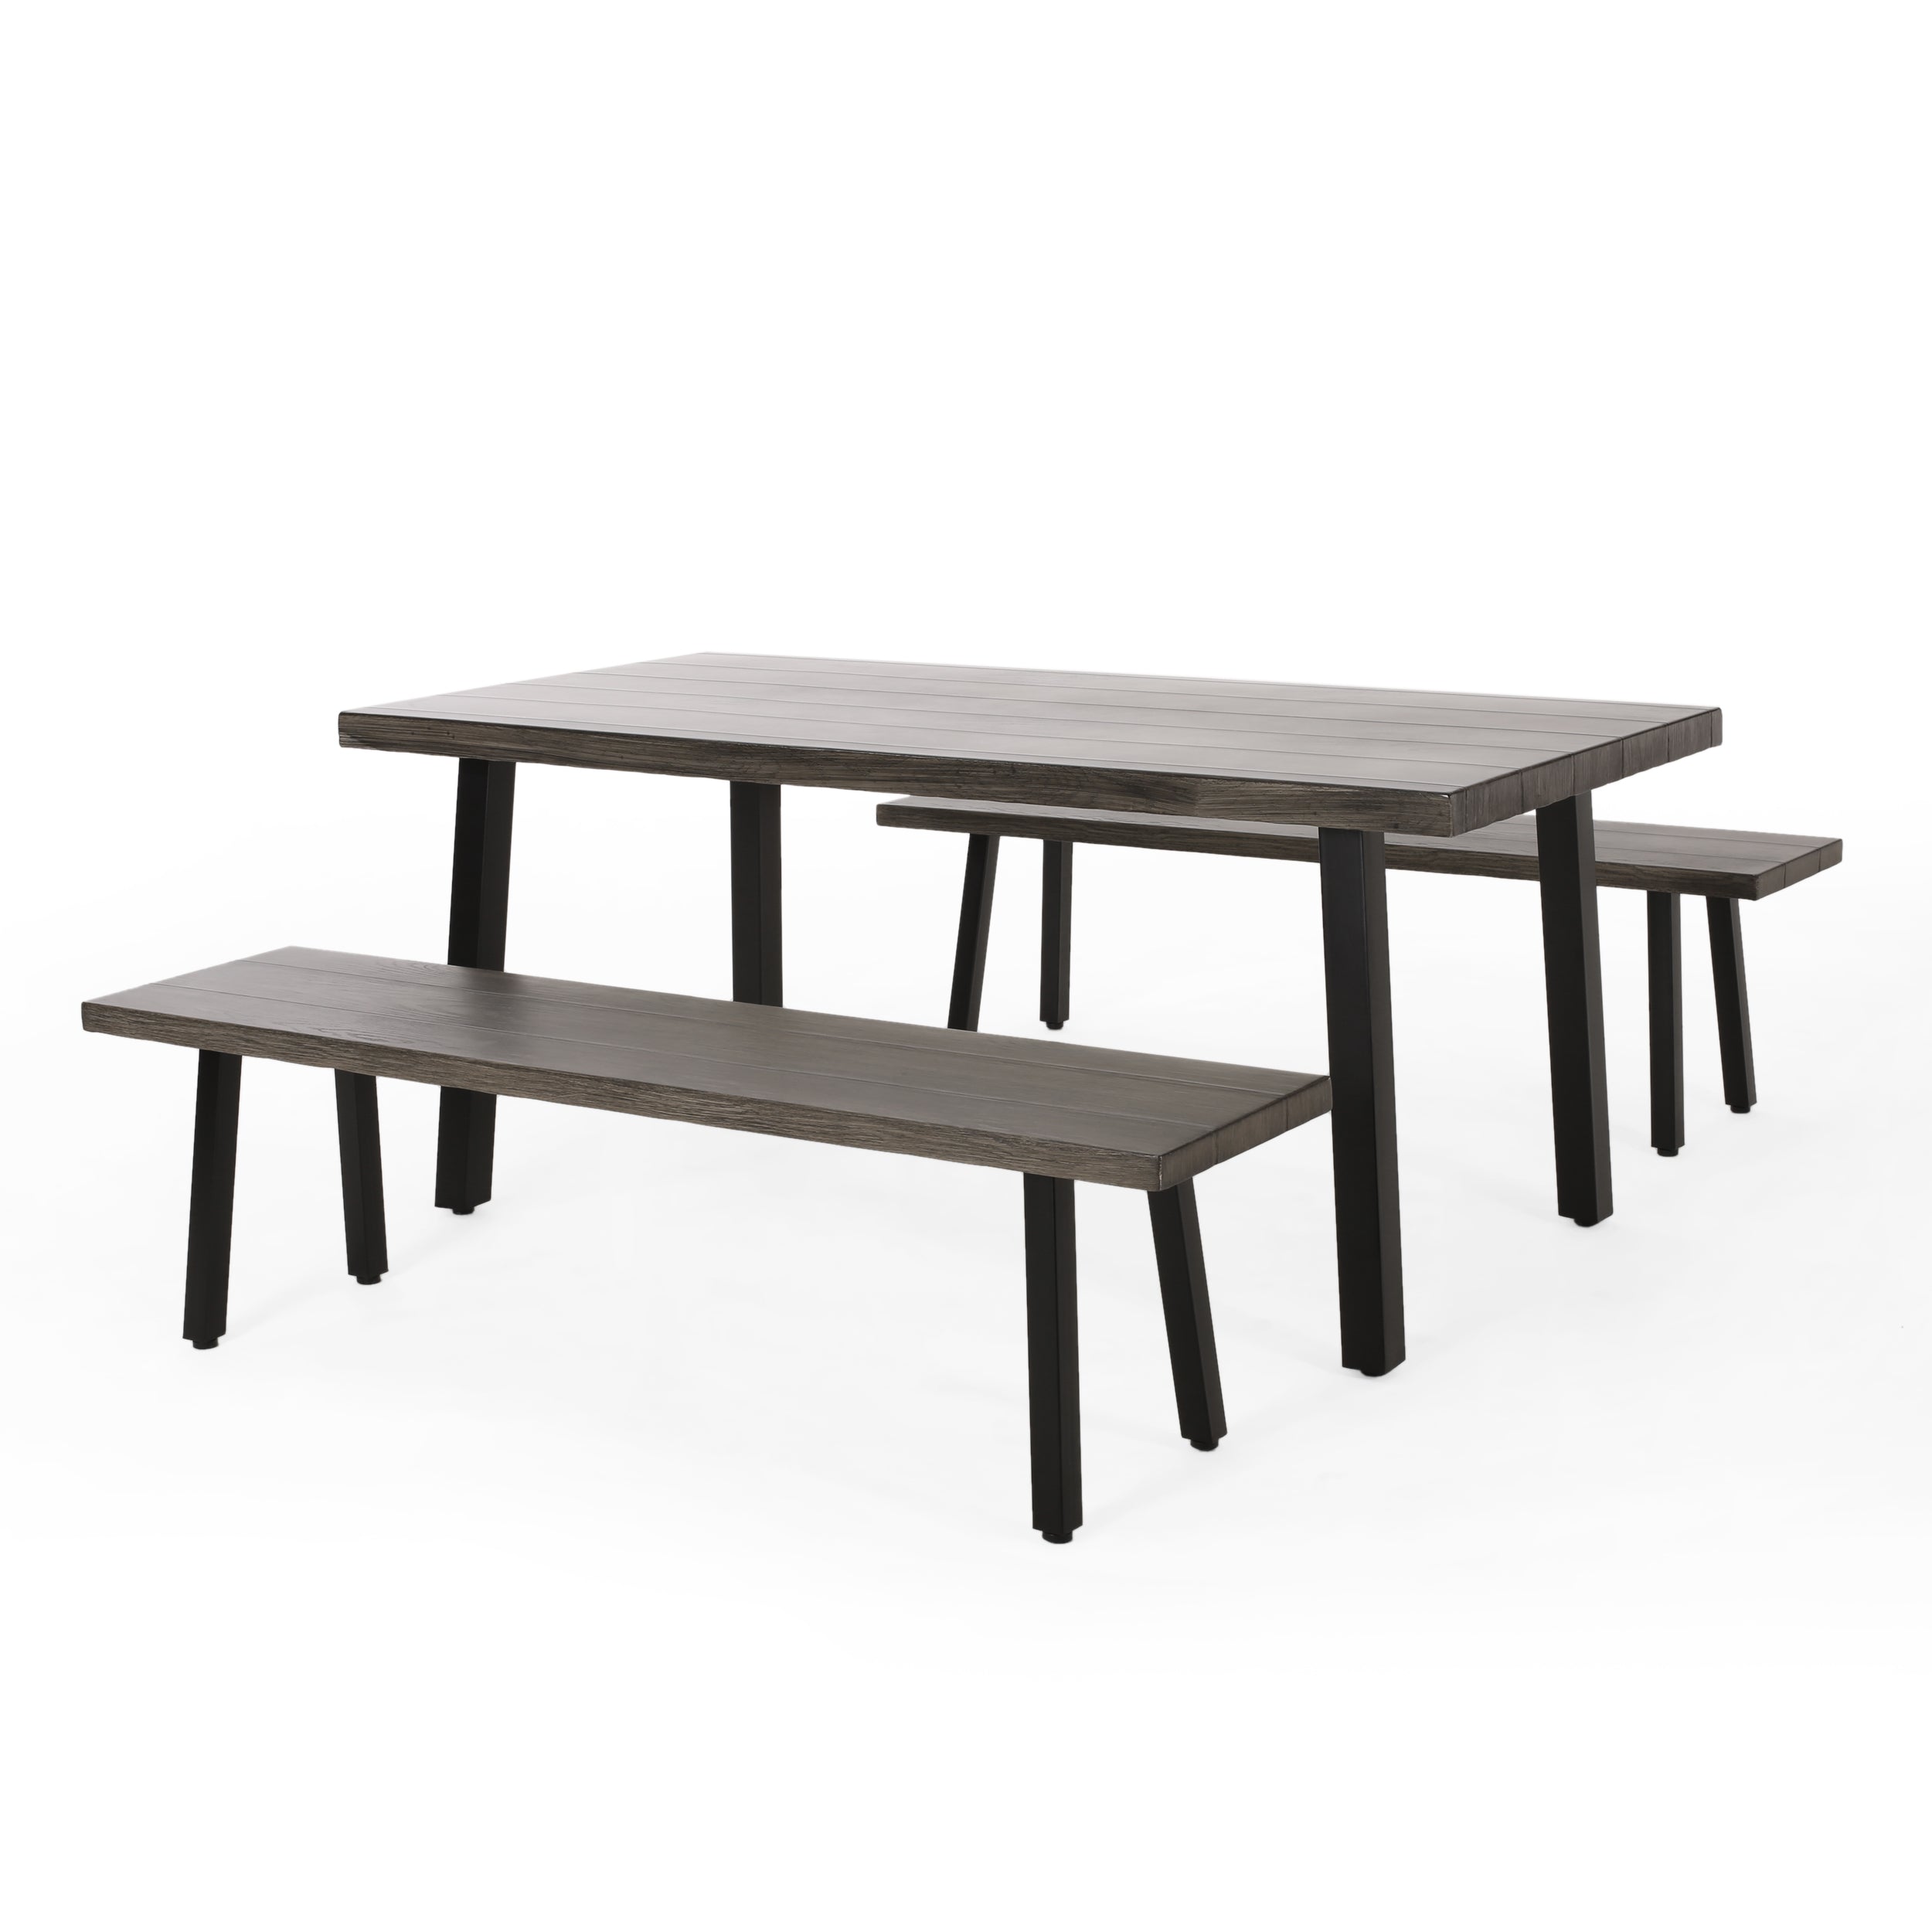 Altair Outdoor Modern Industrial 3 Piece Aluminum Dining Set with Benches Default Title